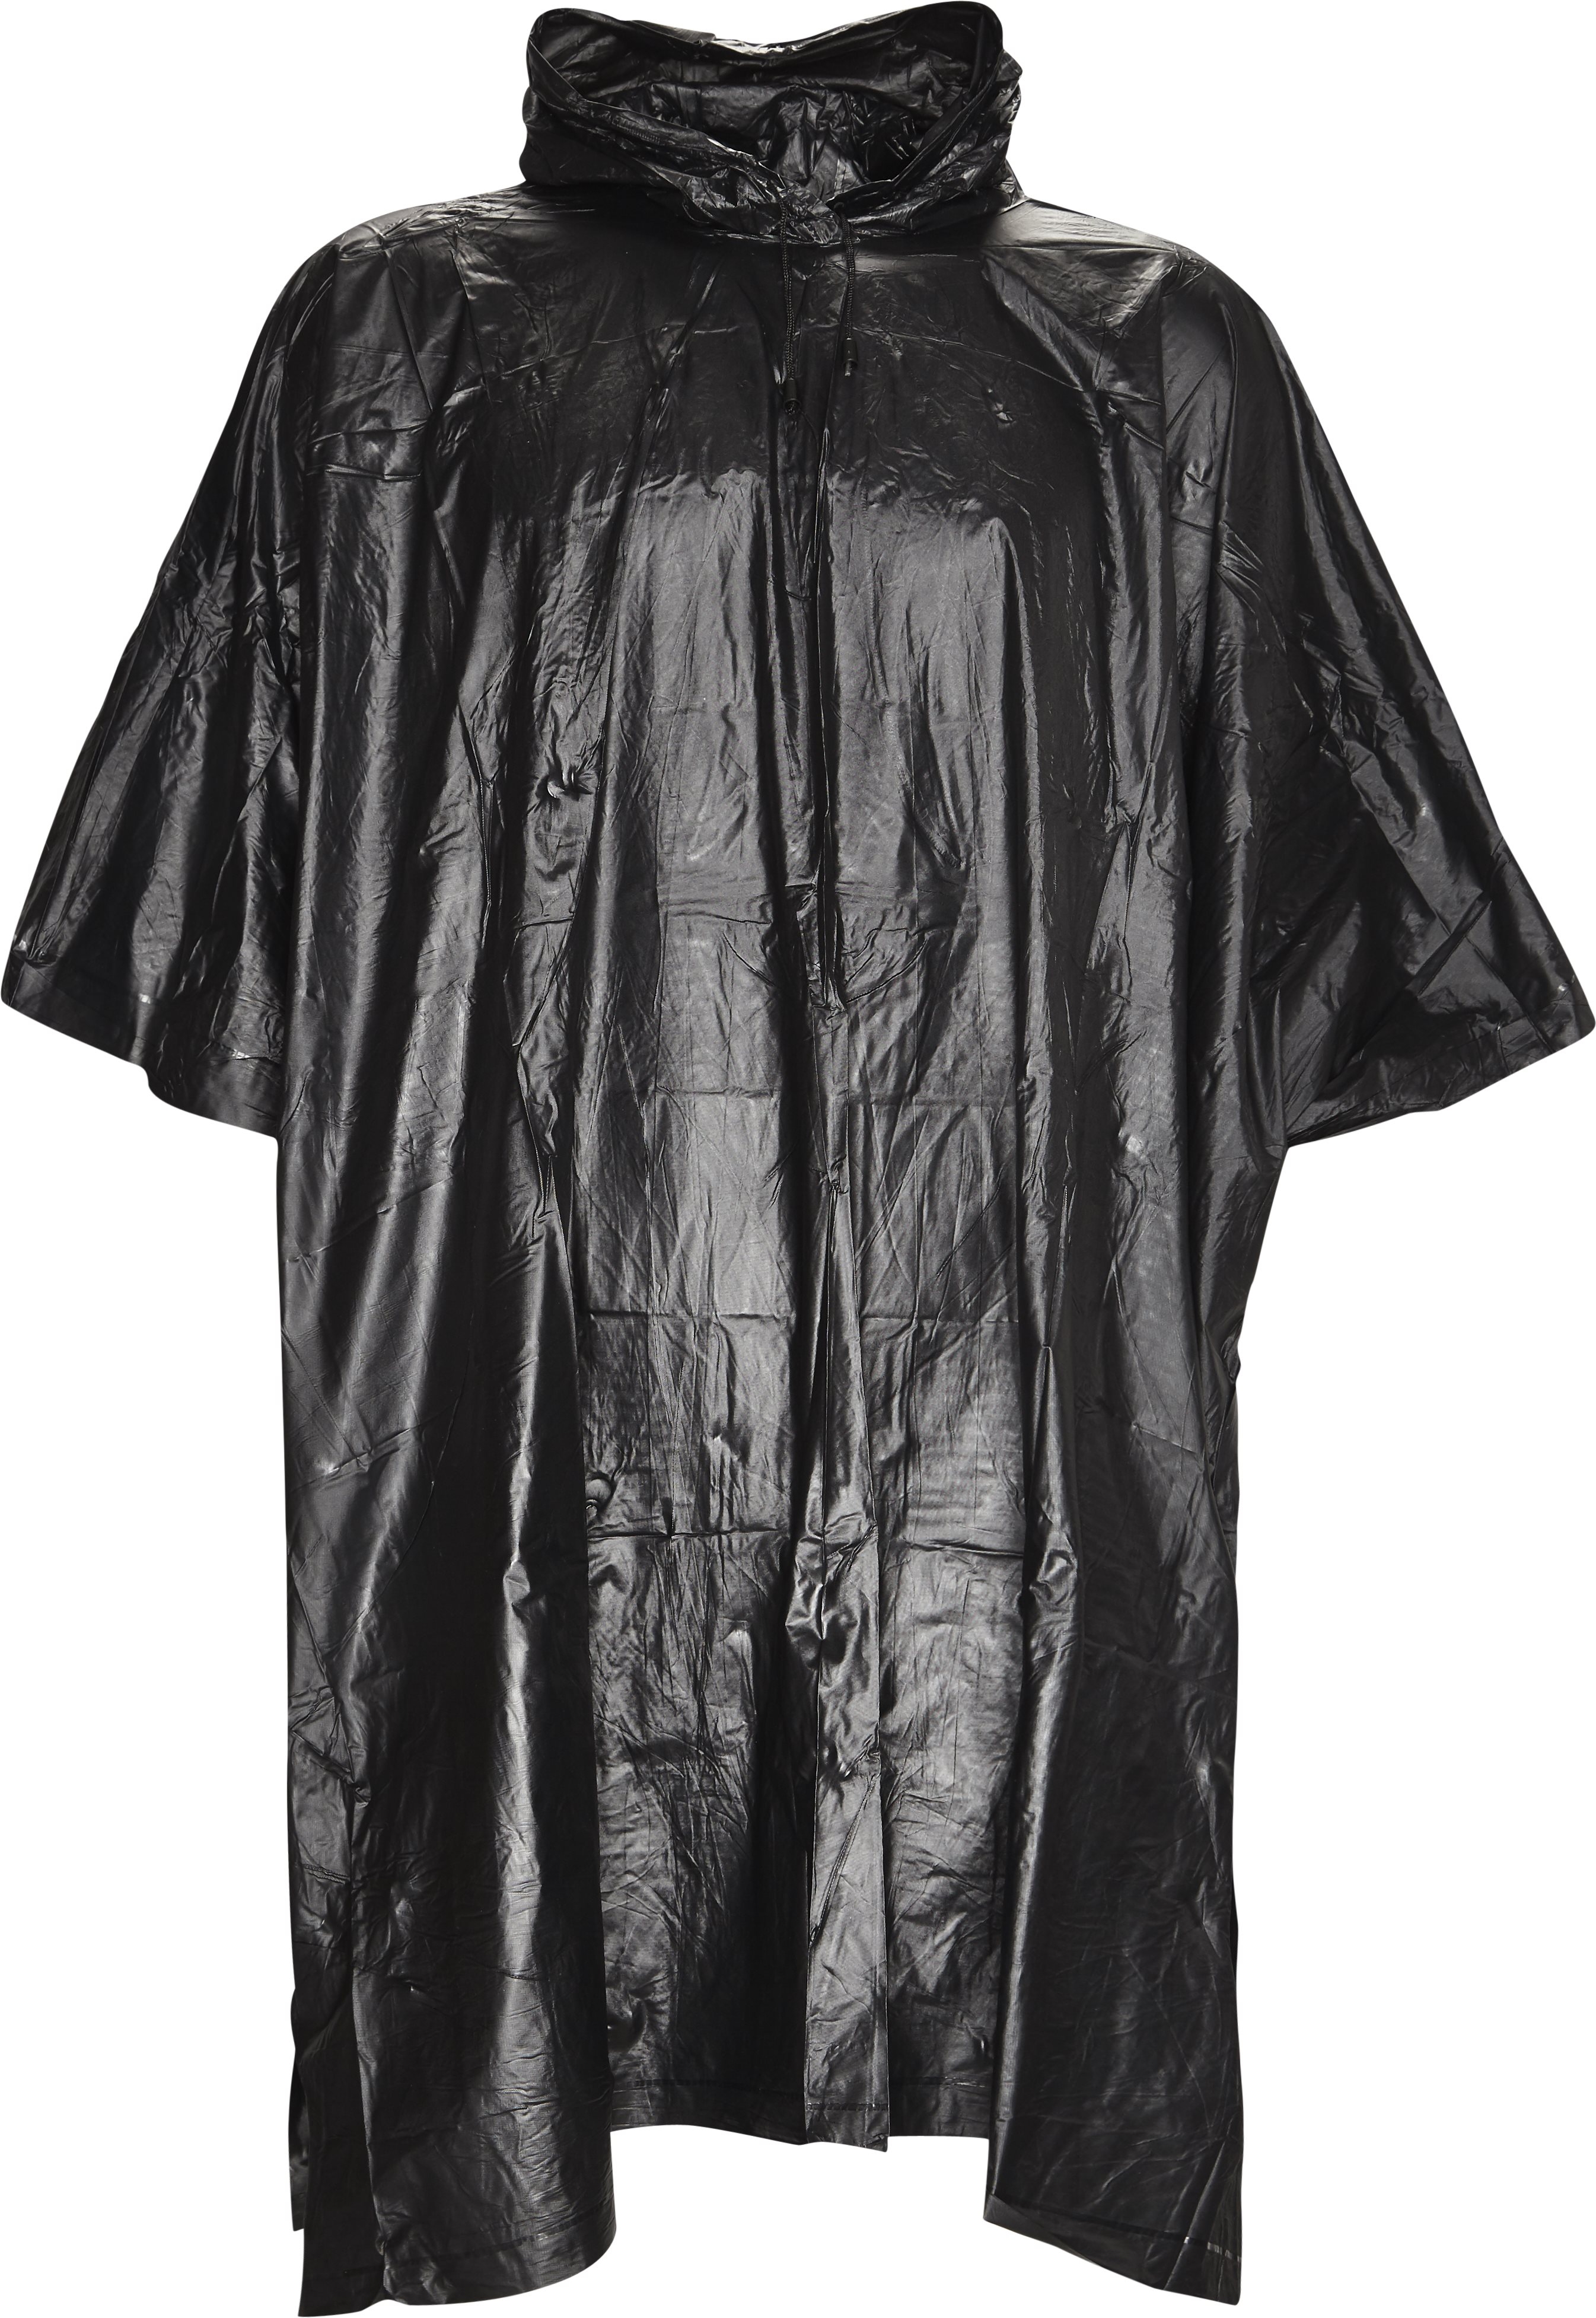 PONCHO - Accessories - Loose fit - Black